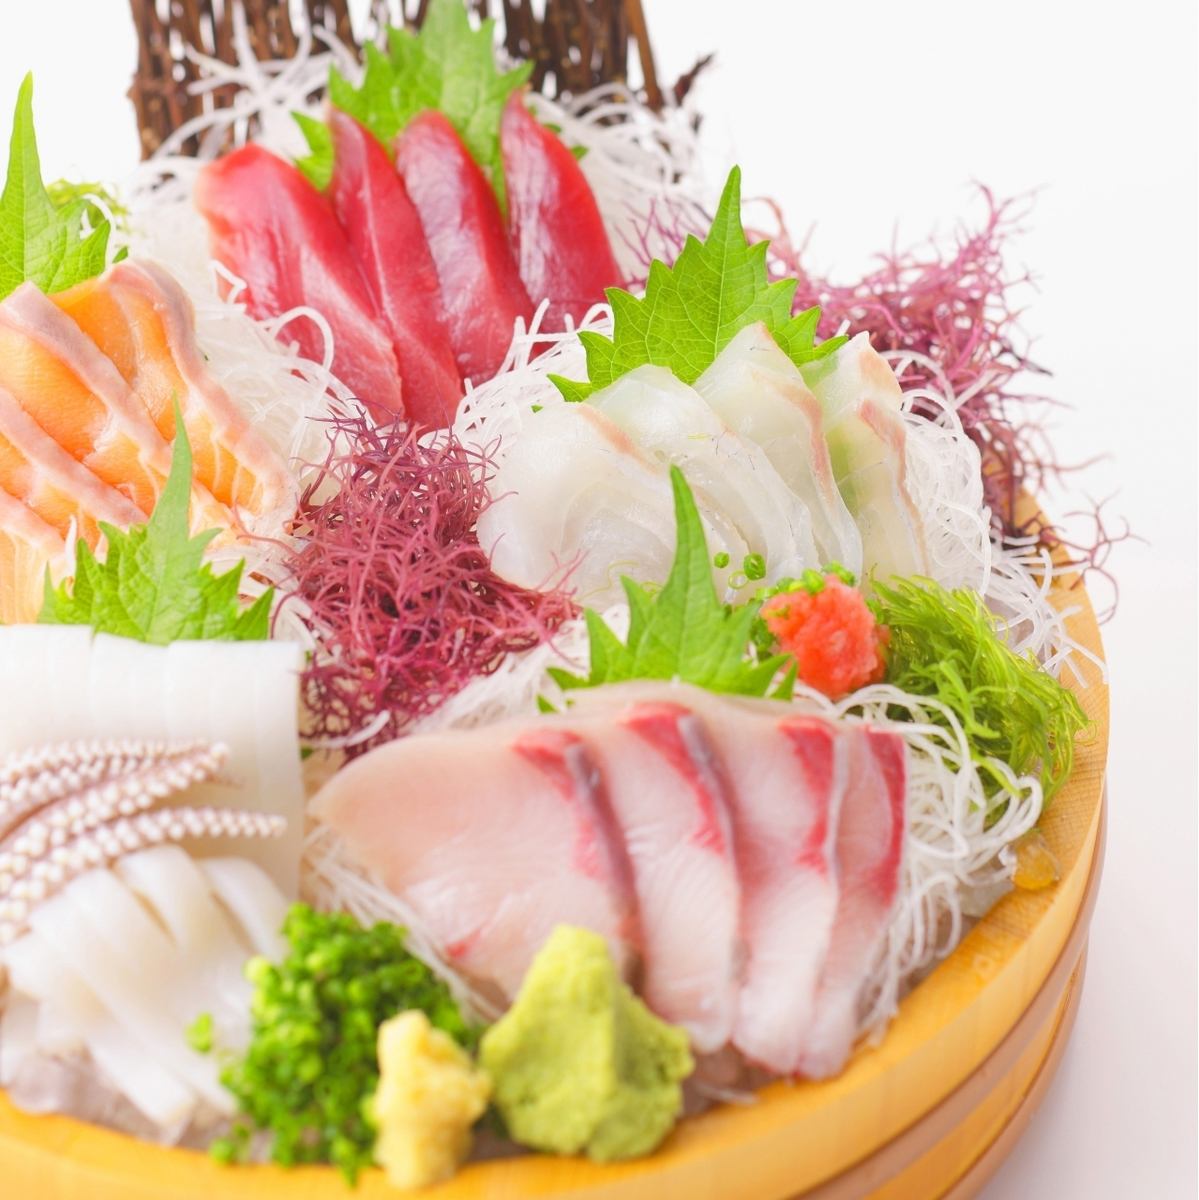 Directly delivered every day ☆ Now in season! We offer carefully selected seafood [fresh fish] ◎